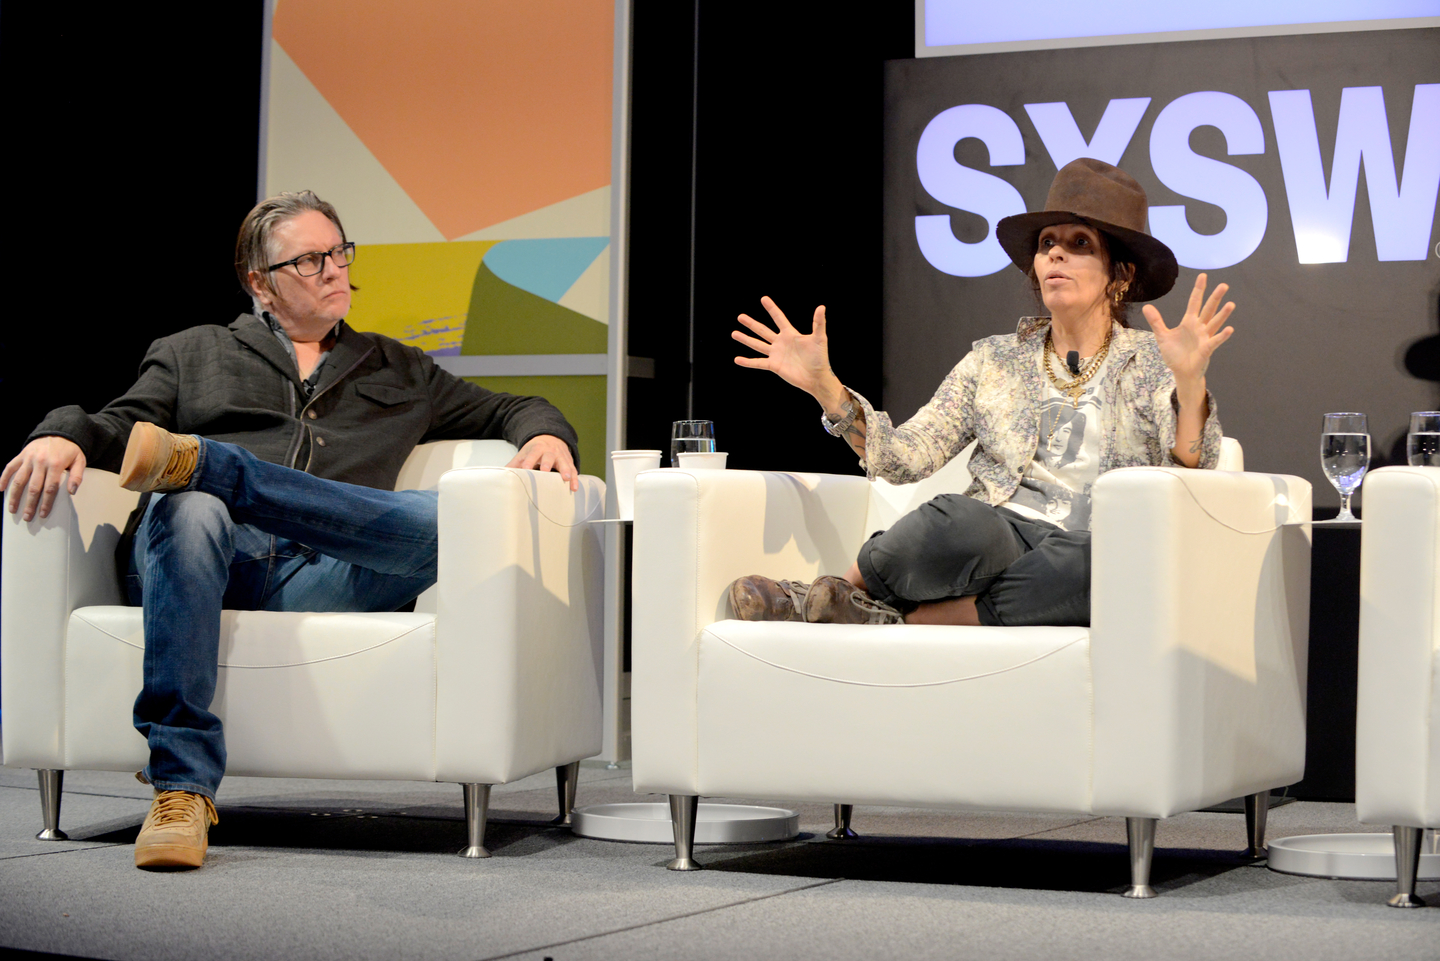 Kerry Brown and Linda Perry held a Music Keynote Conversation on Thursday. Photo by Nicola Gell/Getty Images for SXSW